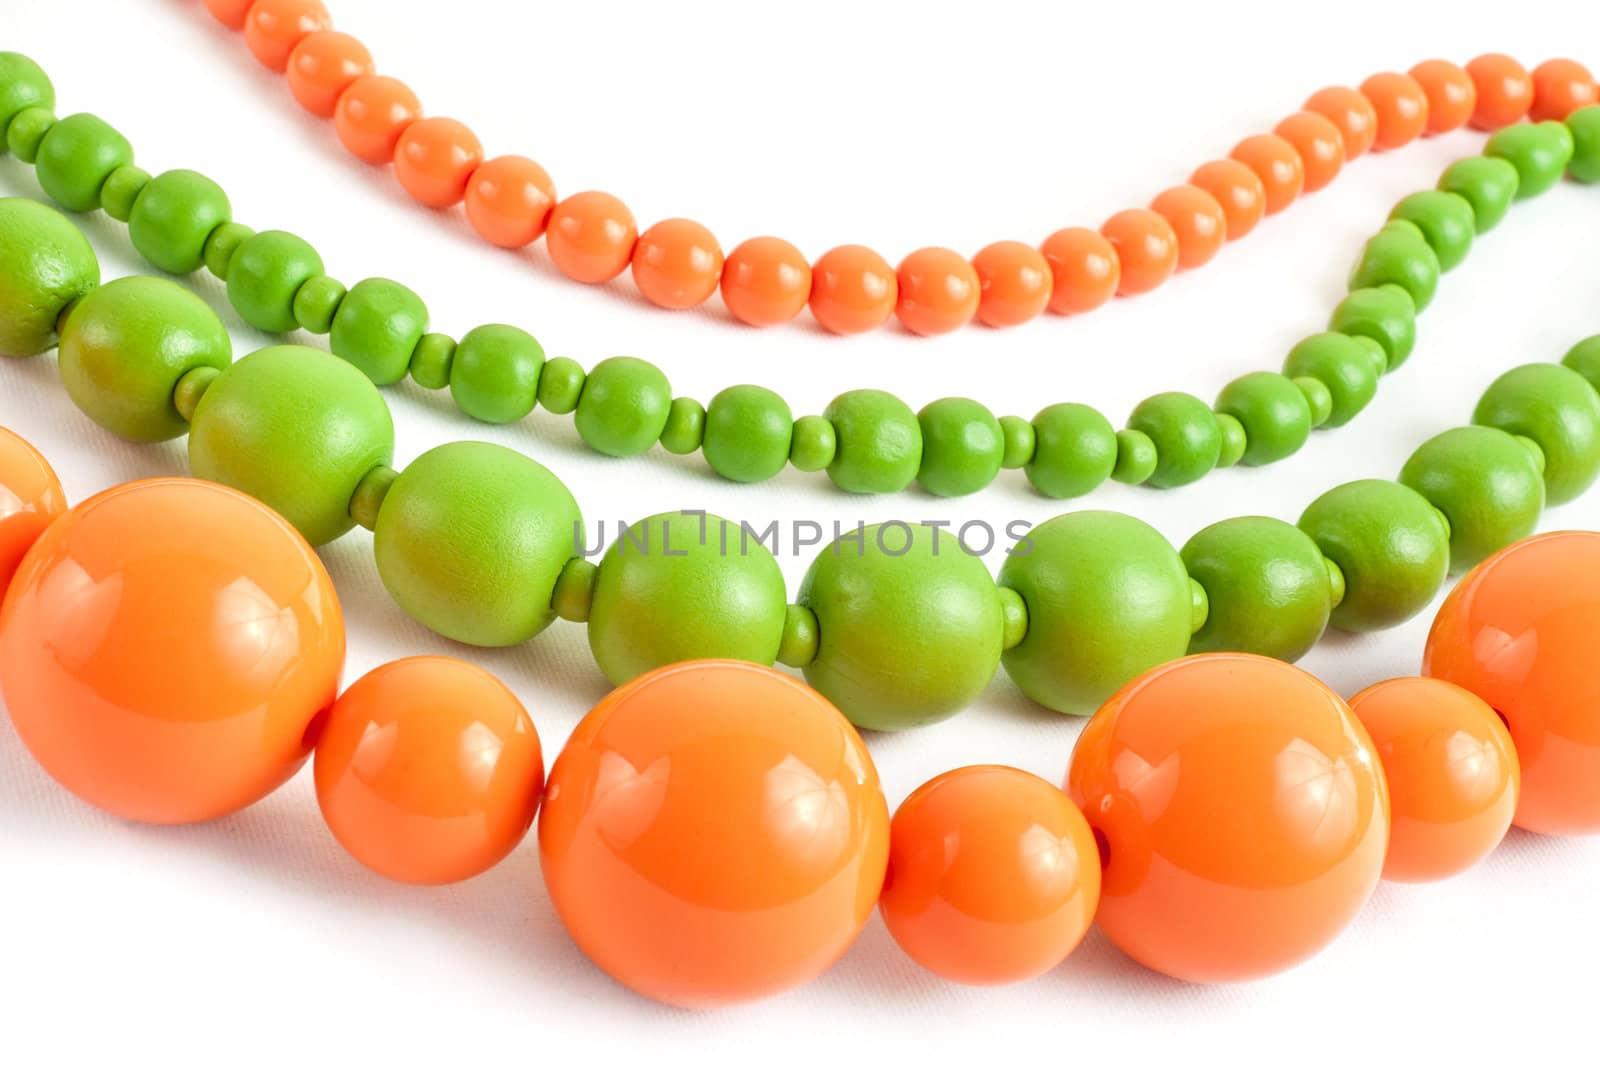 Orange and green colored necklace